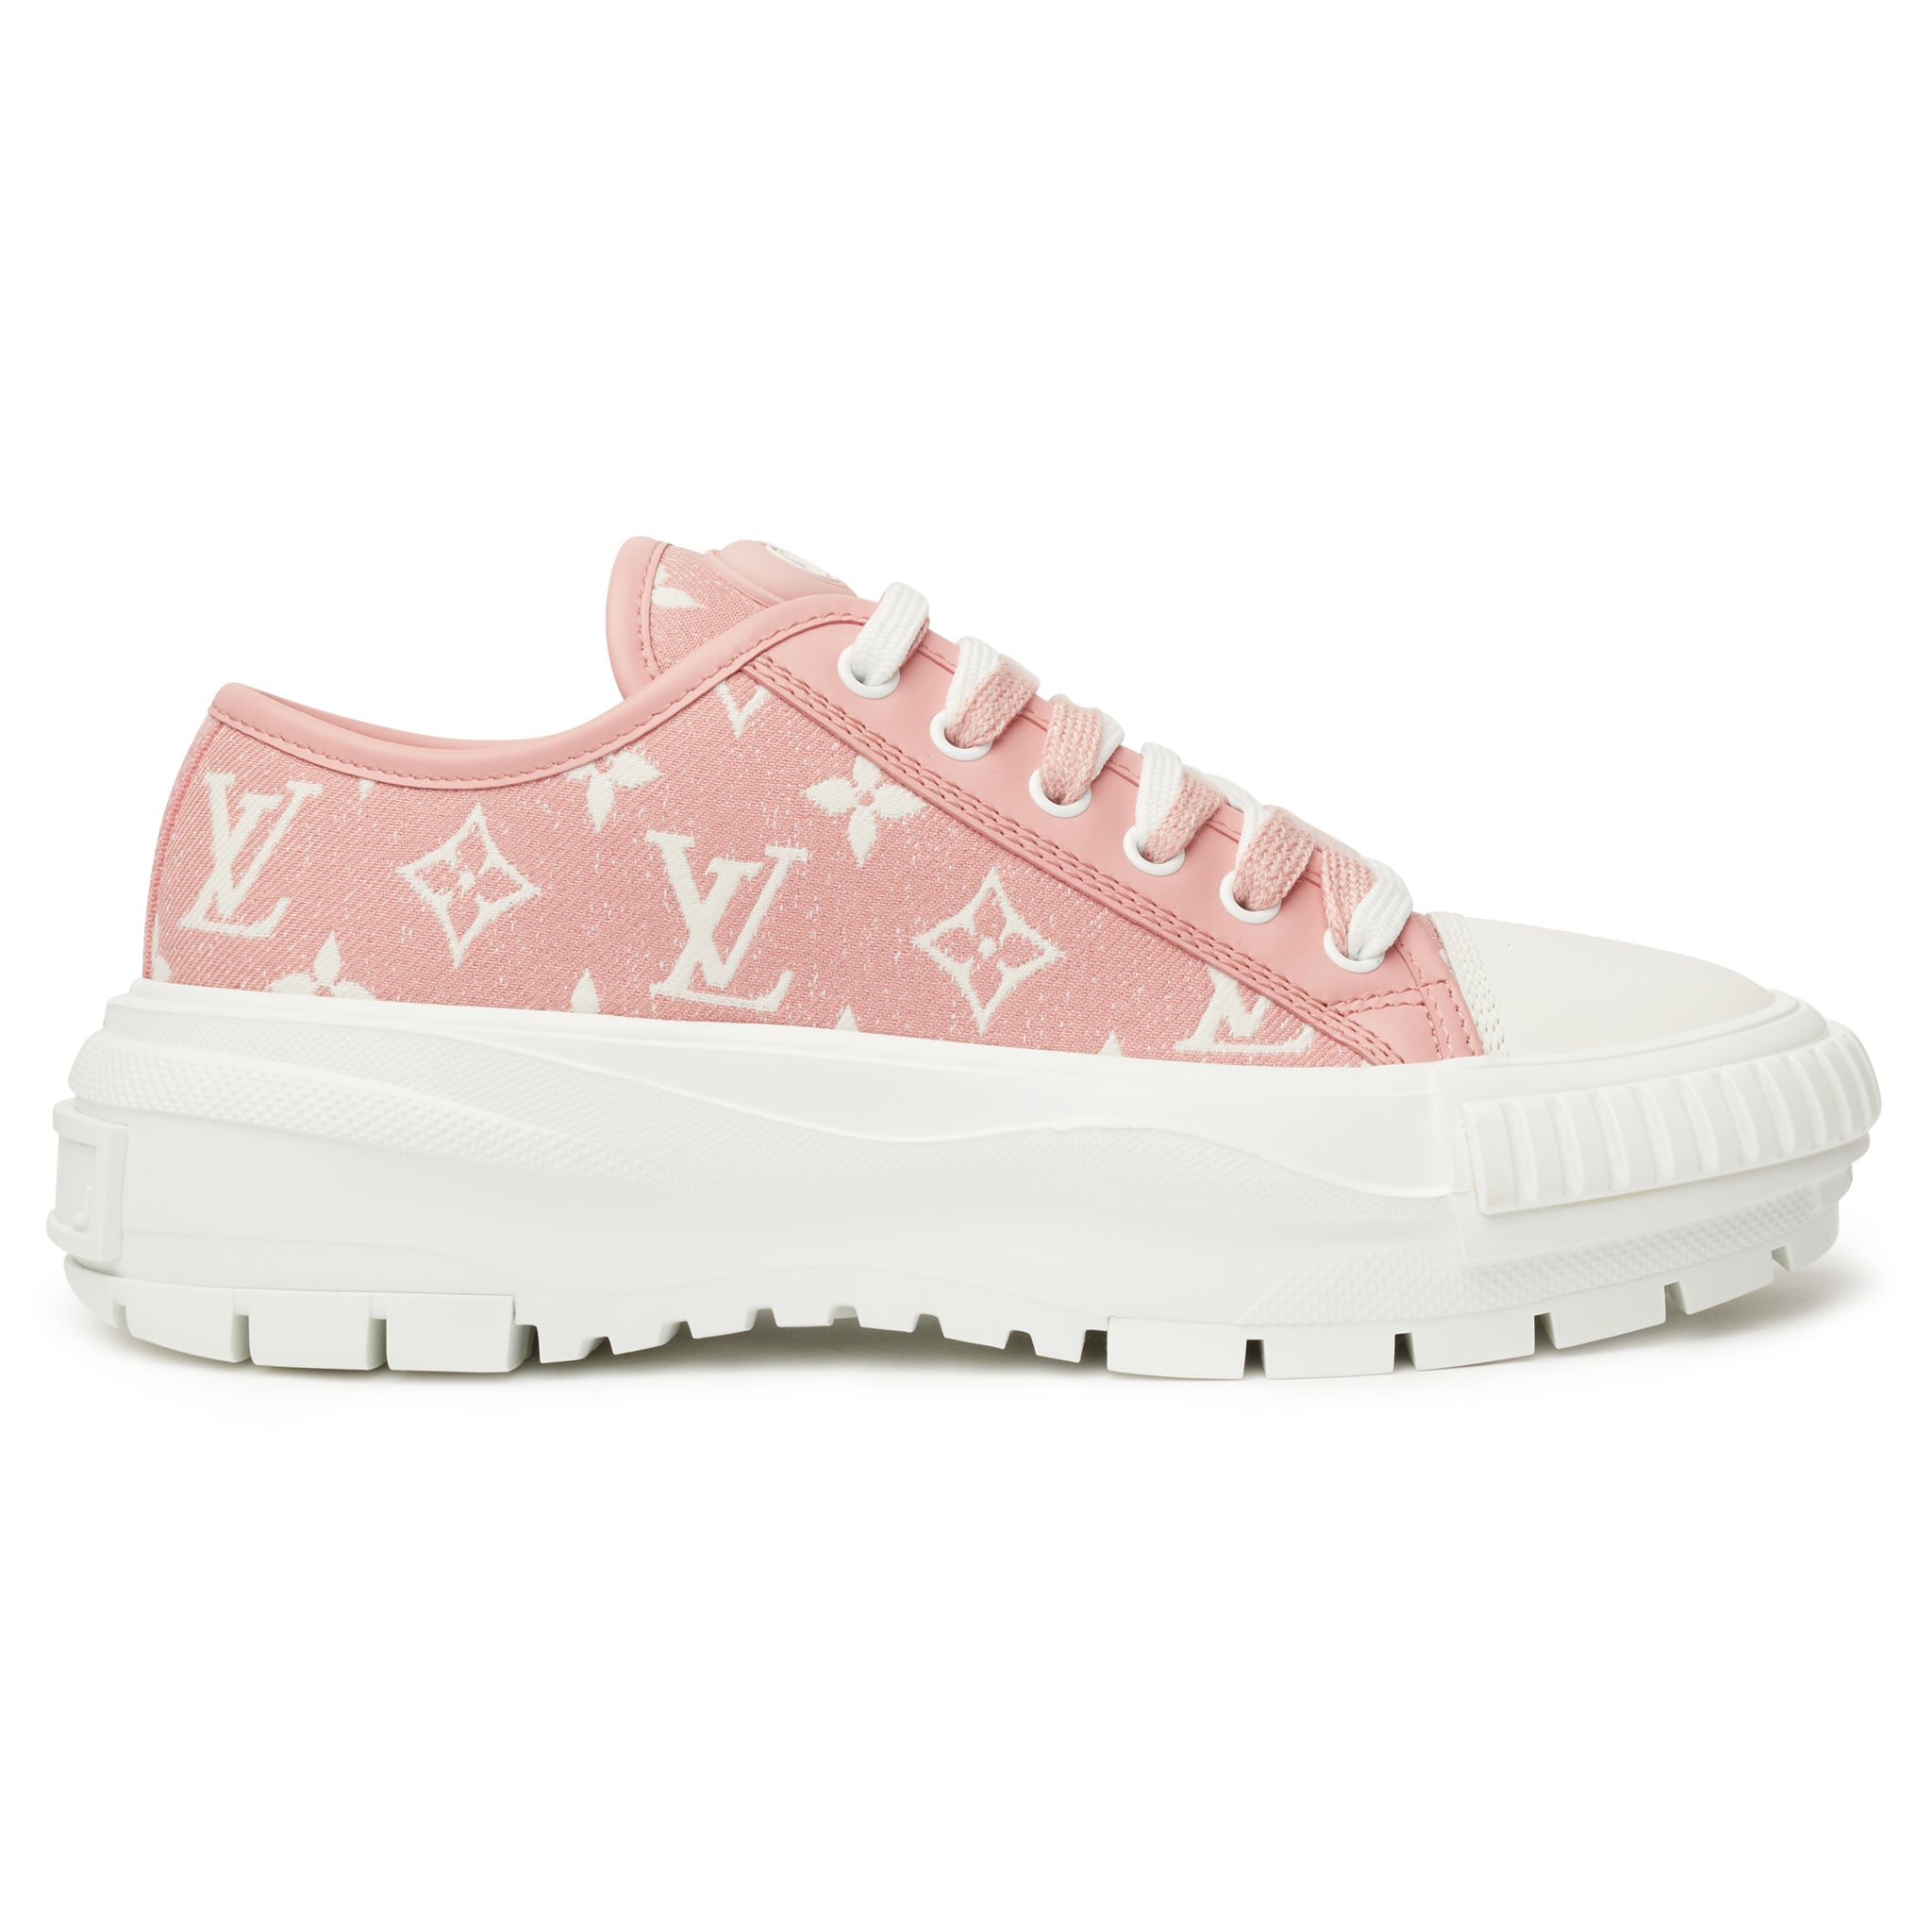 louis vuitton sneakers pink and white